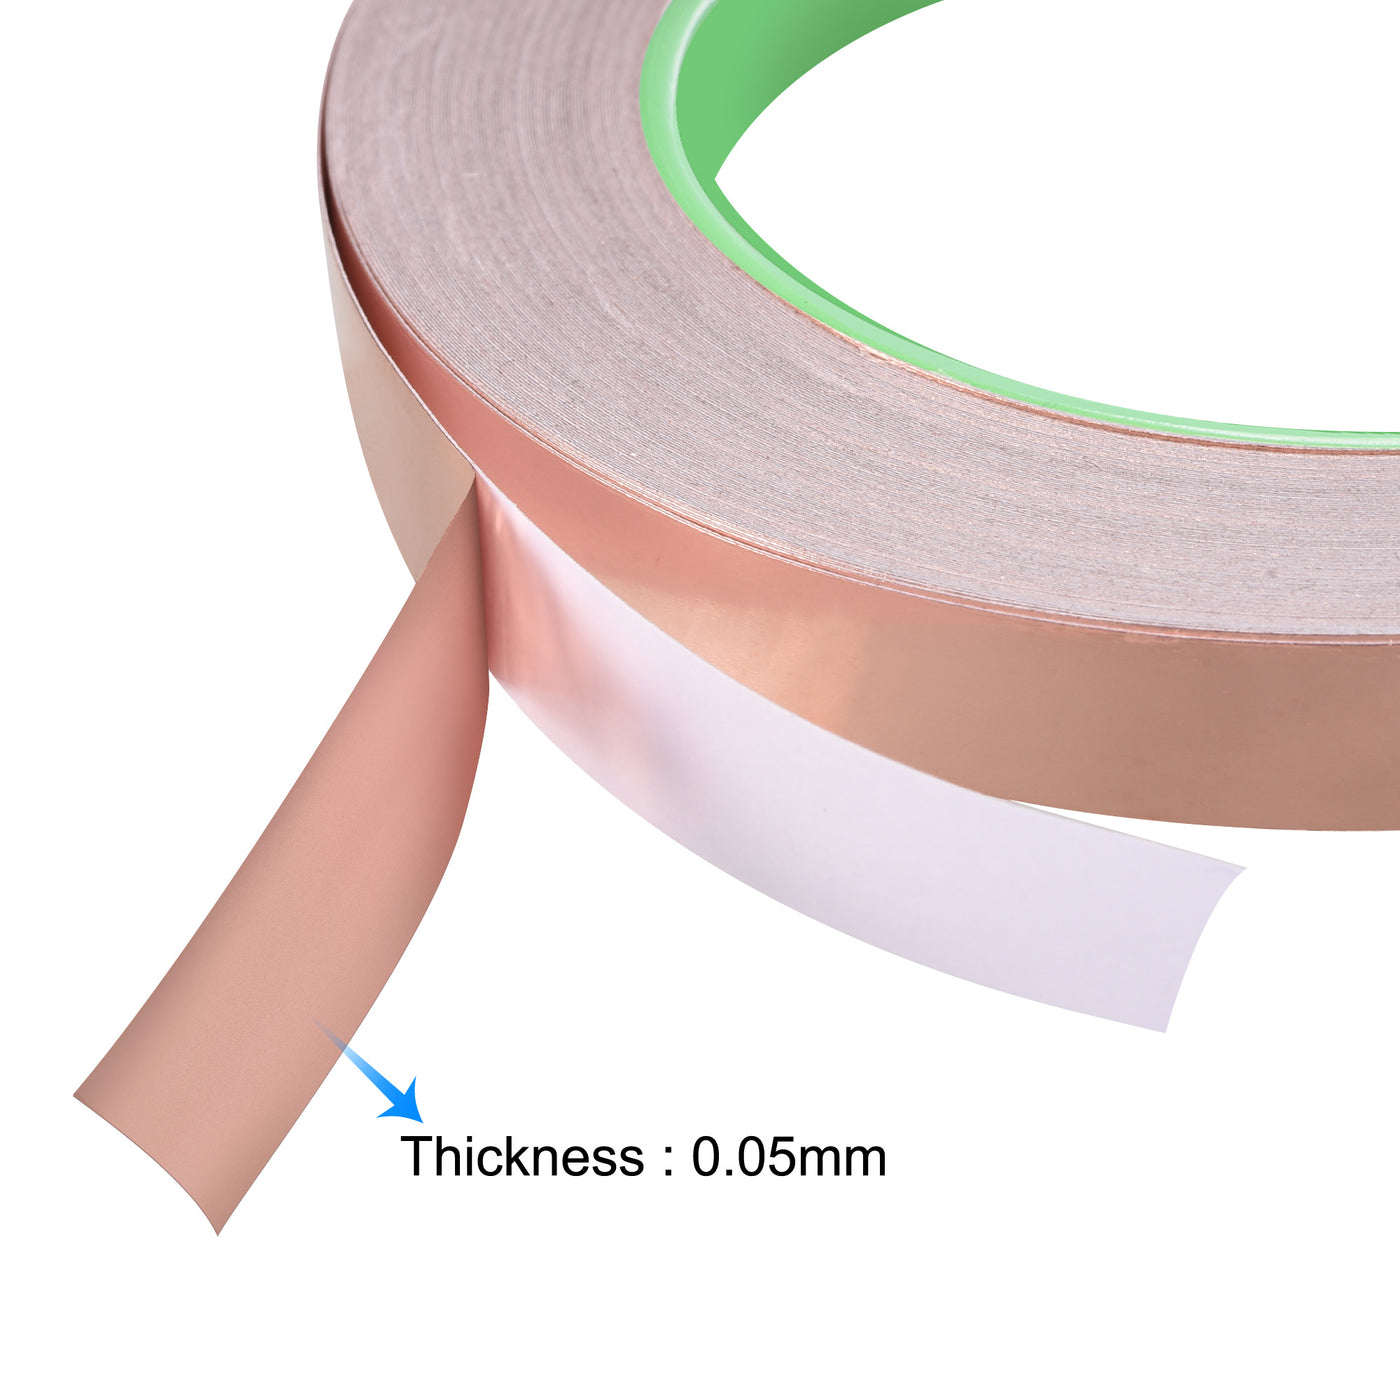 uxcell Uxcell Double-Sided Conductive Tape Copper Foil Tape 5mm x 30m/98.4ft 2pcs